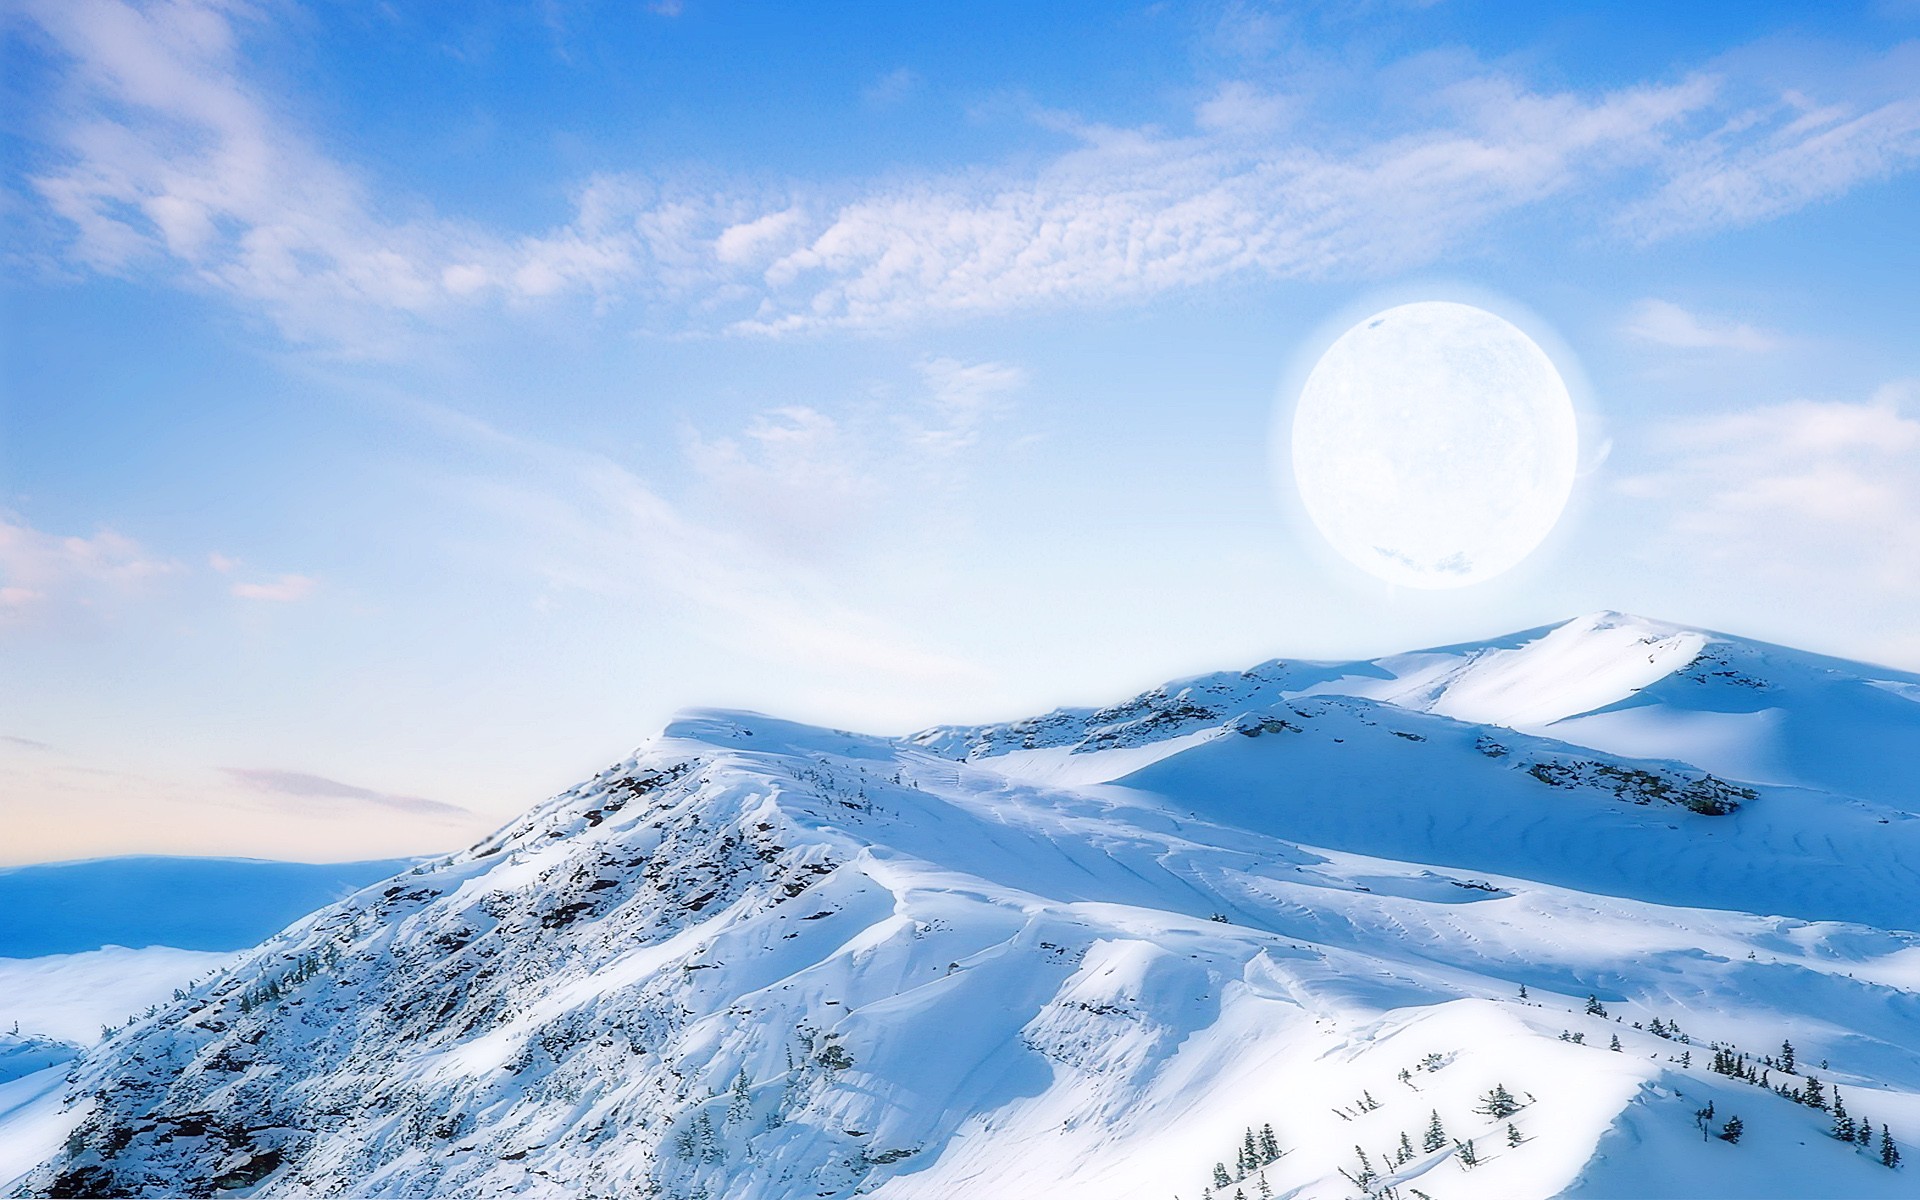 General 1920x1200 landscape nature snow mountains ice cold snowy peak snowy mountain